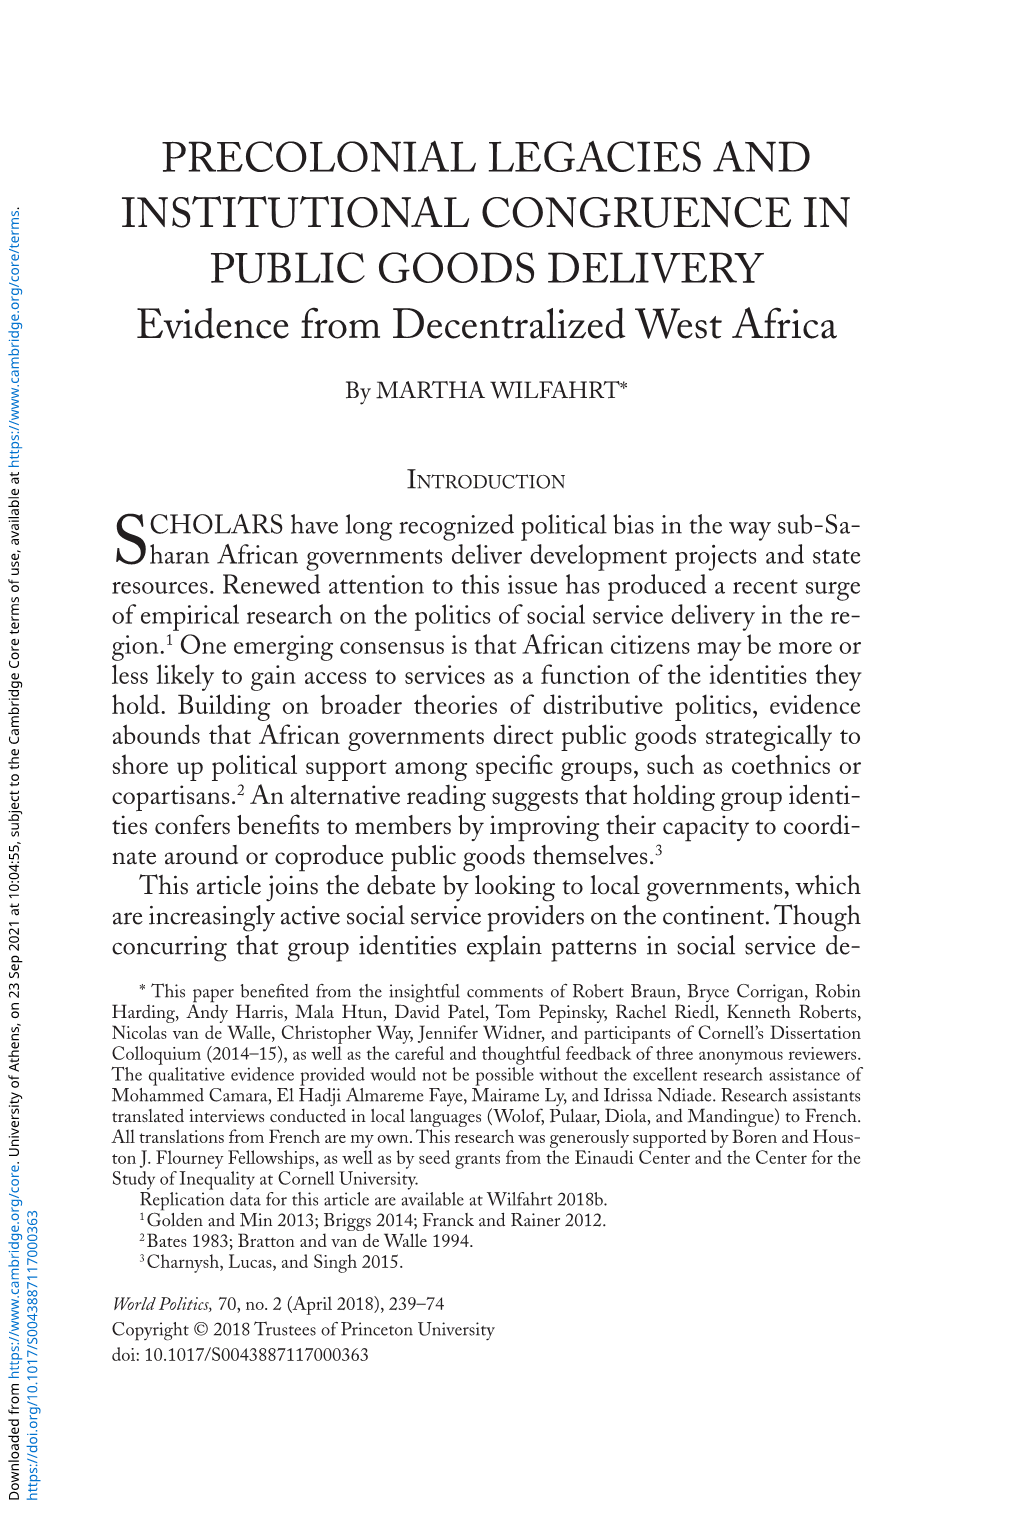 Precolonial Legacies and Institutional Congruence in Public Goods Delivery: Evidence from Decentralized West Africa.” Harvard Dataverse, V1